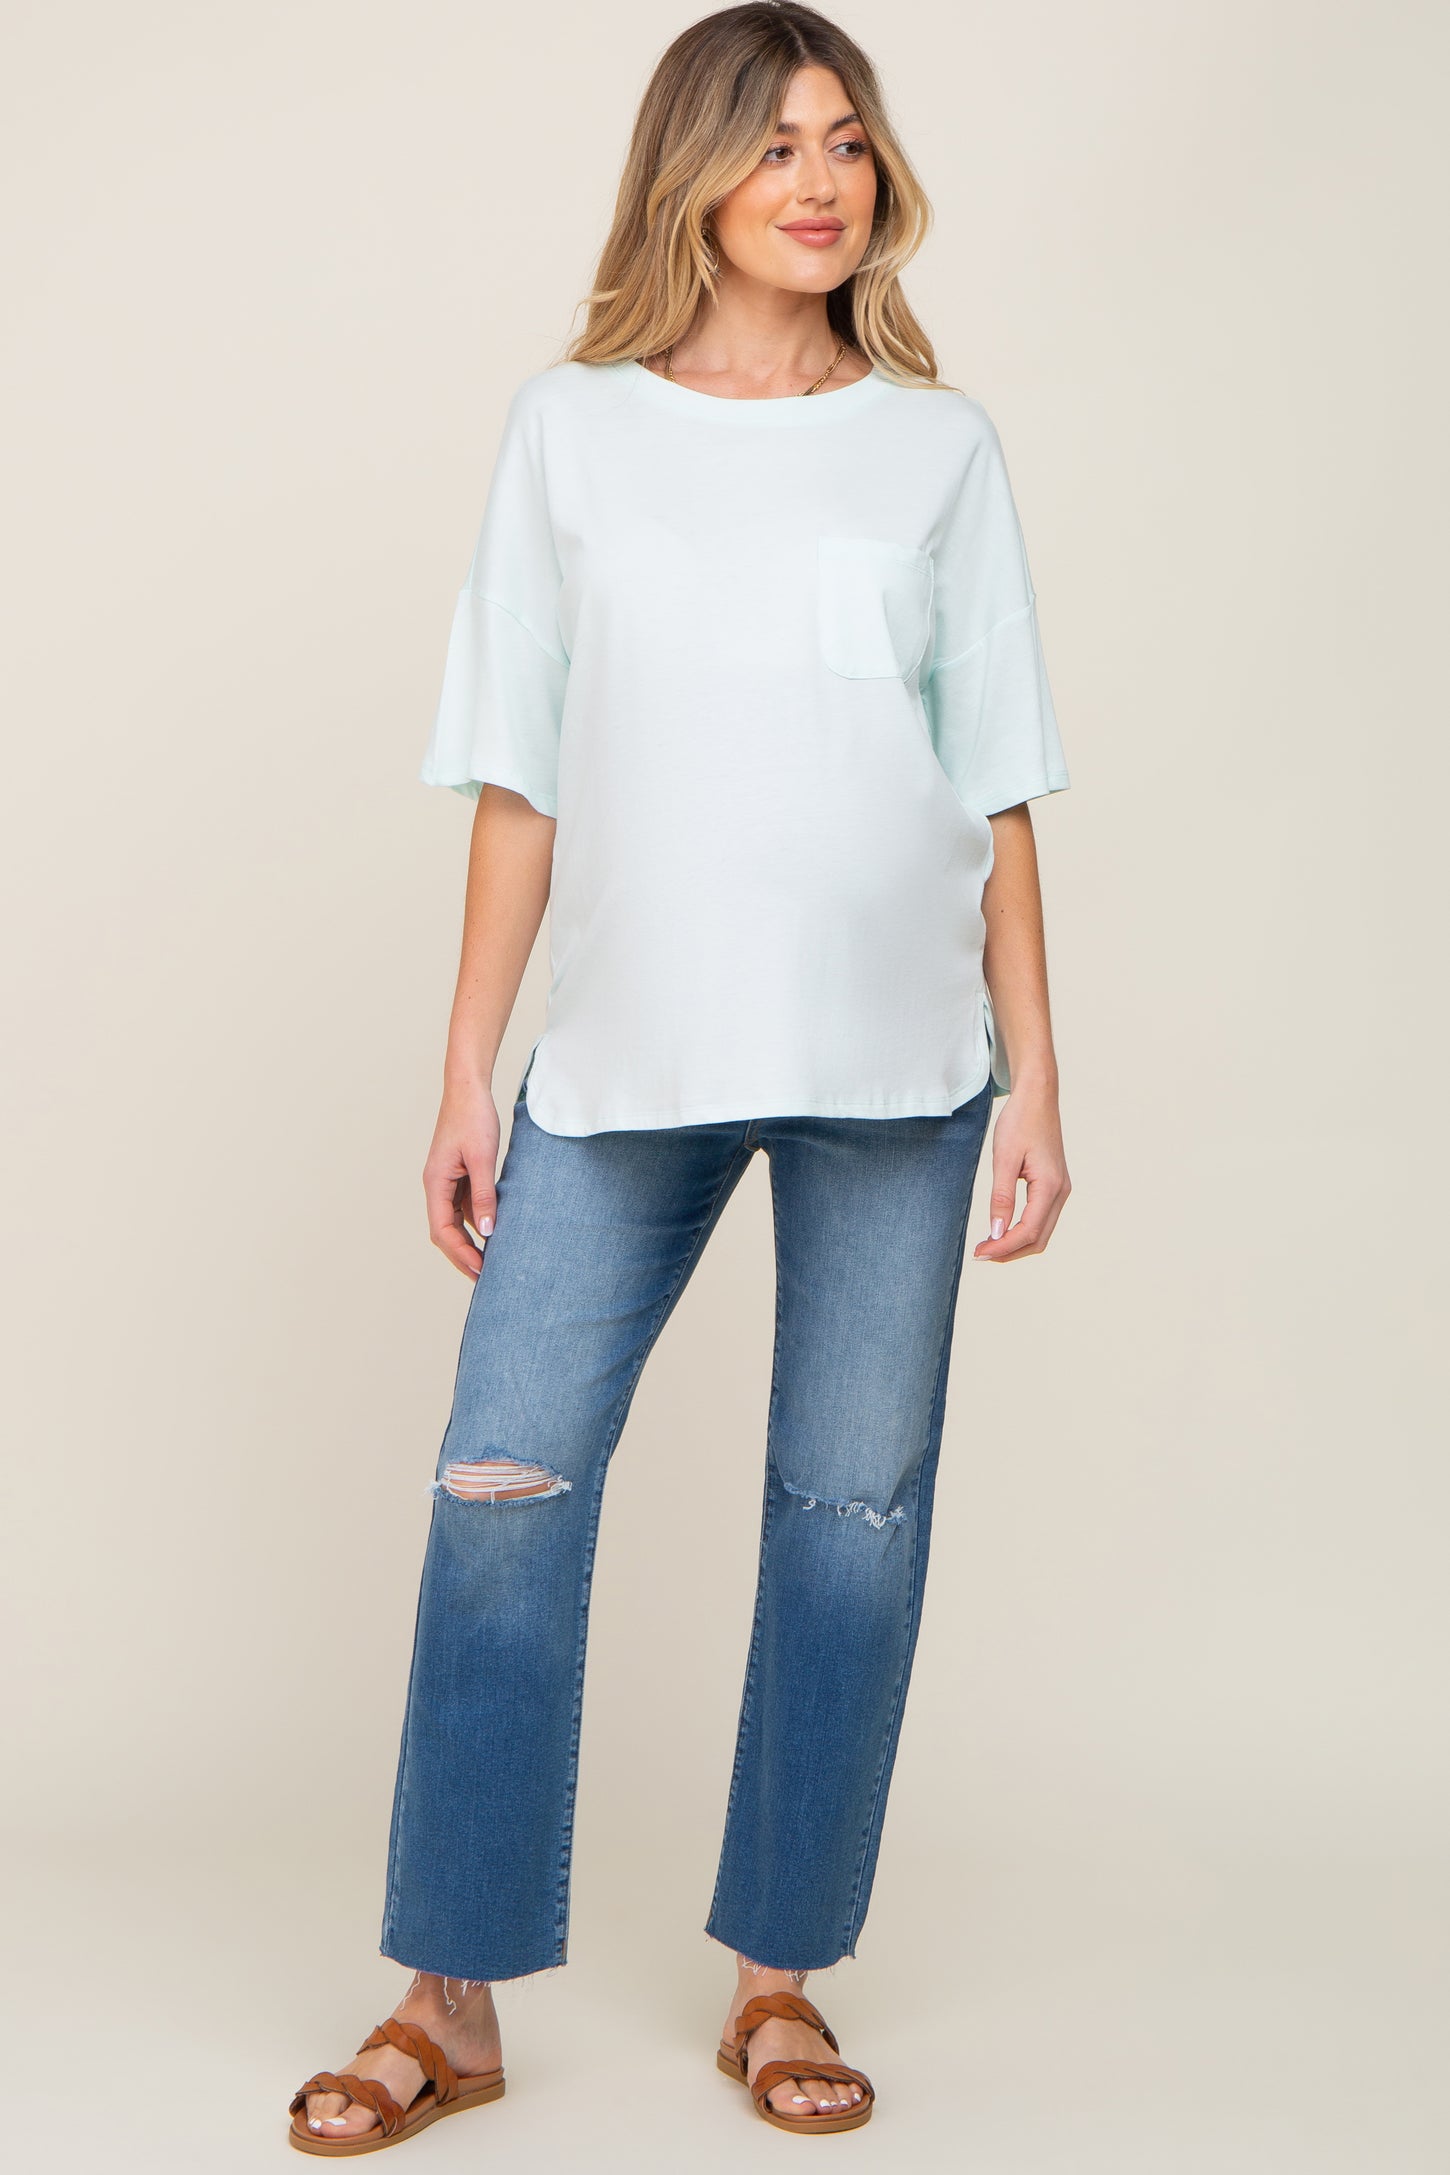 Mint Short Sleeve Pocketed Maternity Top